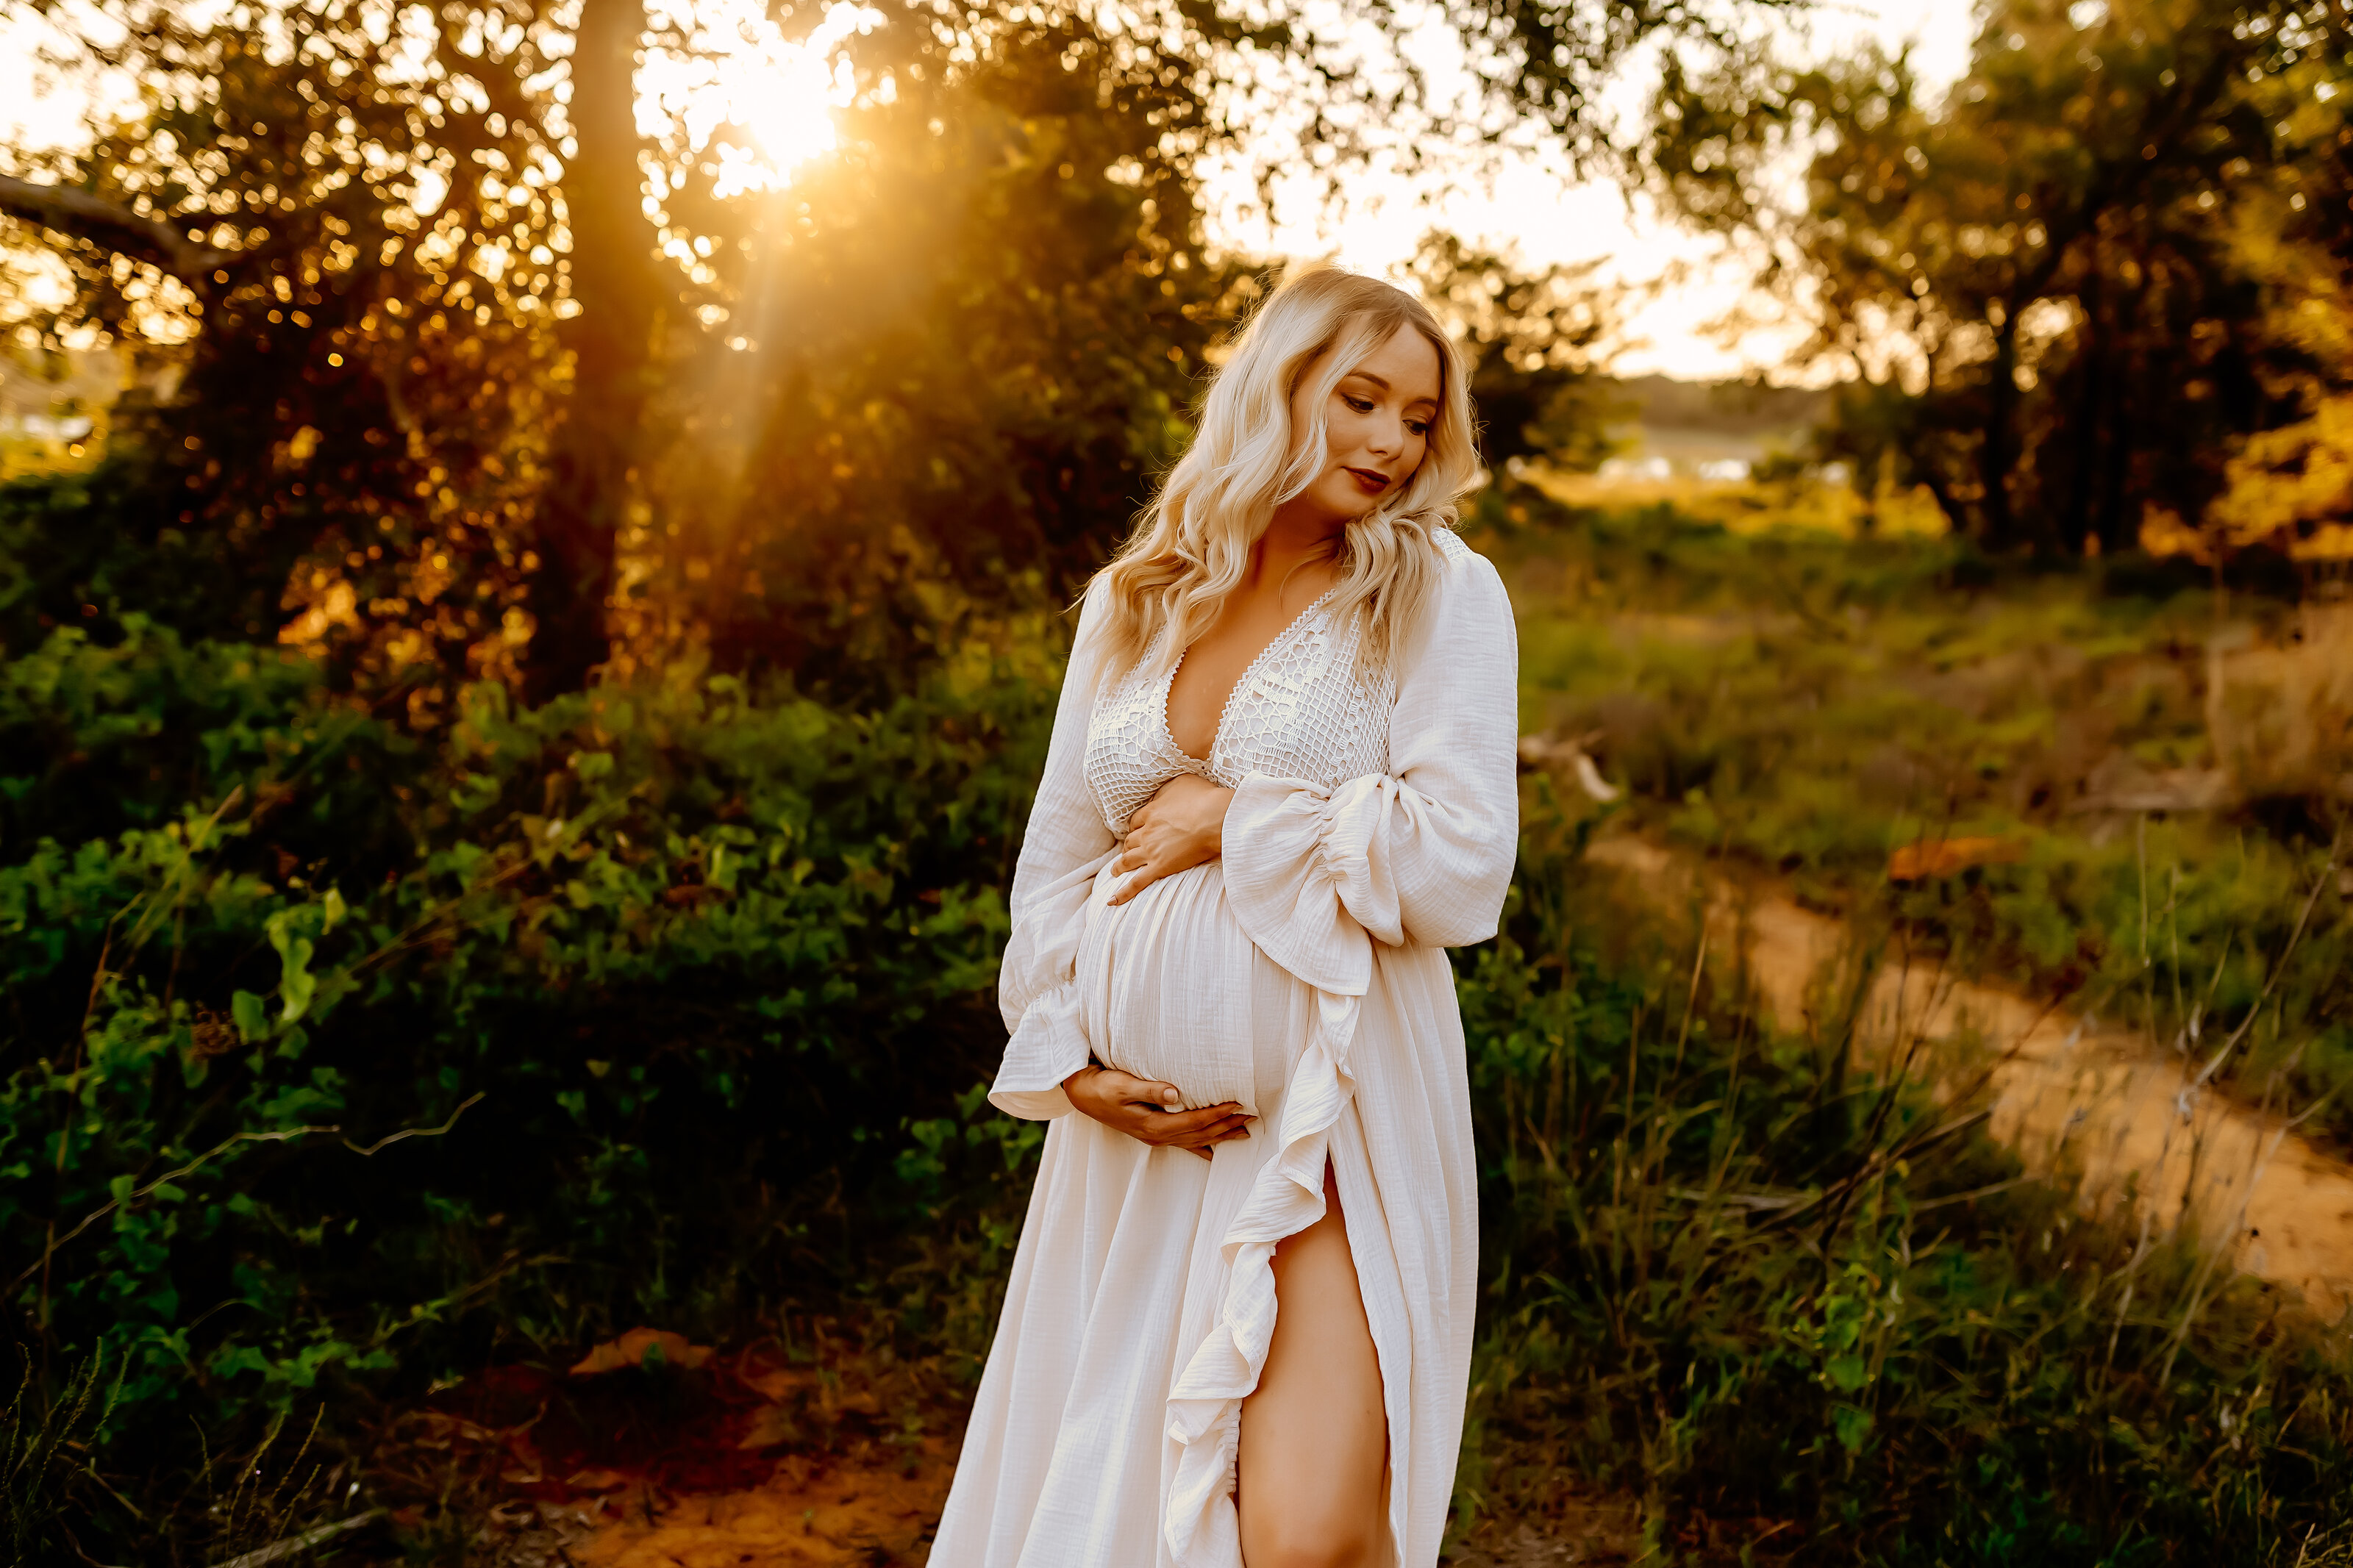 Maternity Session in Flower Mound, Texas | Burleson, Texas Family and Newborn Photographer